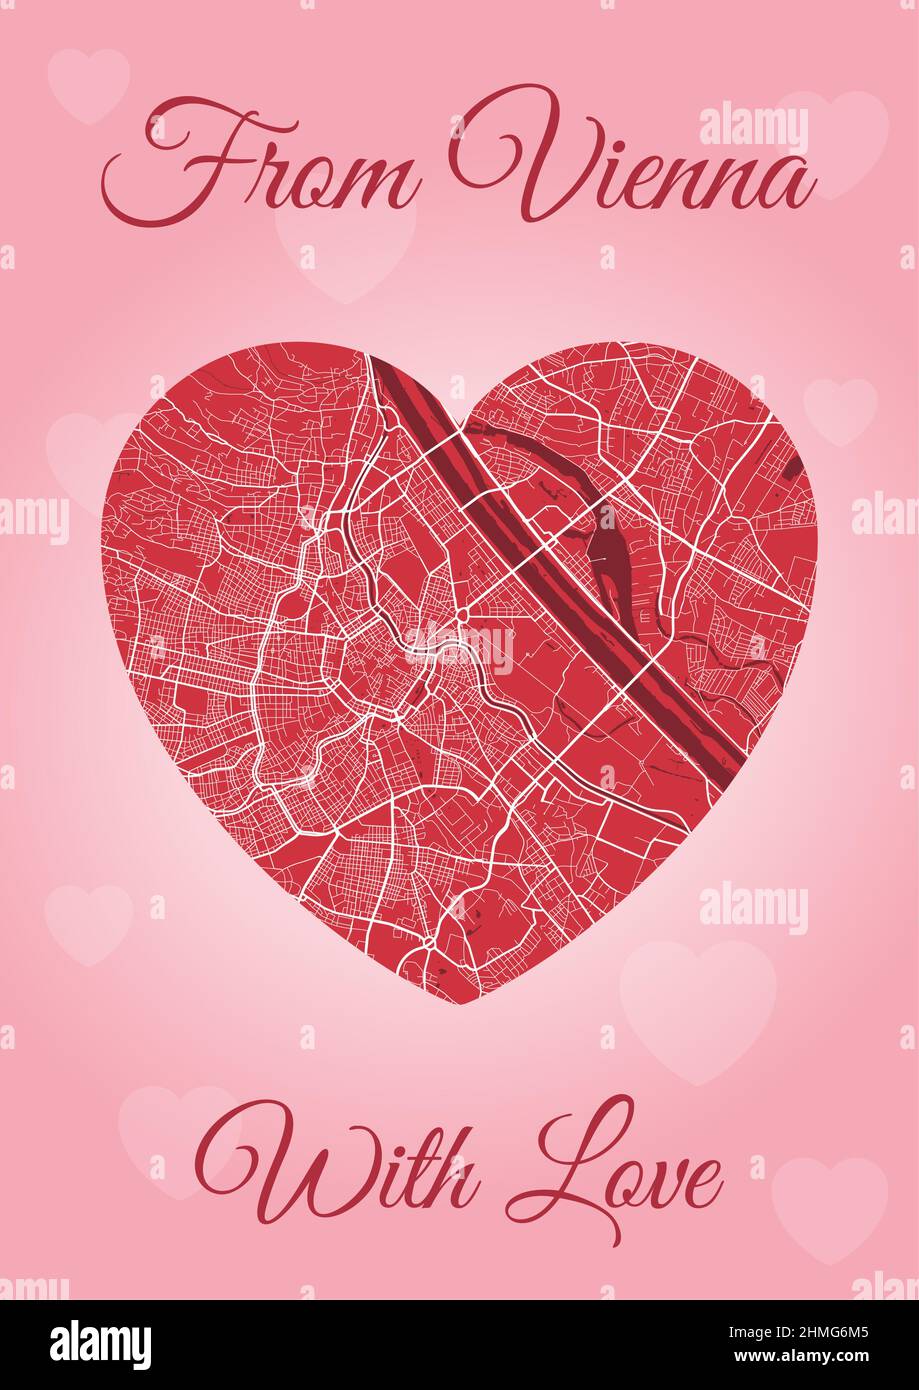 Happy Valentine's day holiday card with Vienna map in heart shape. Vertical A4 Pink and red color vector illustration. Love city travel cityscape. Stock Vector